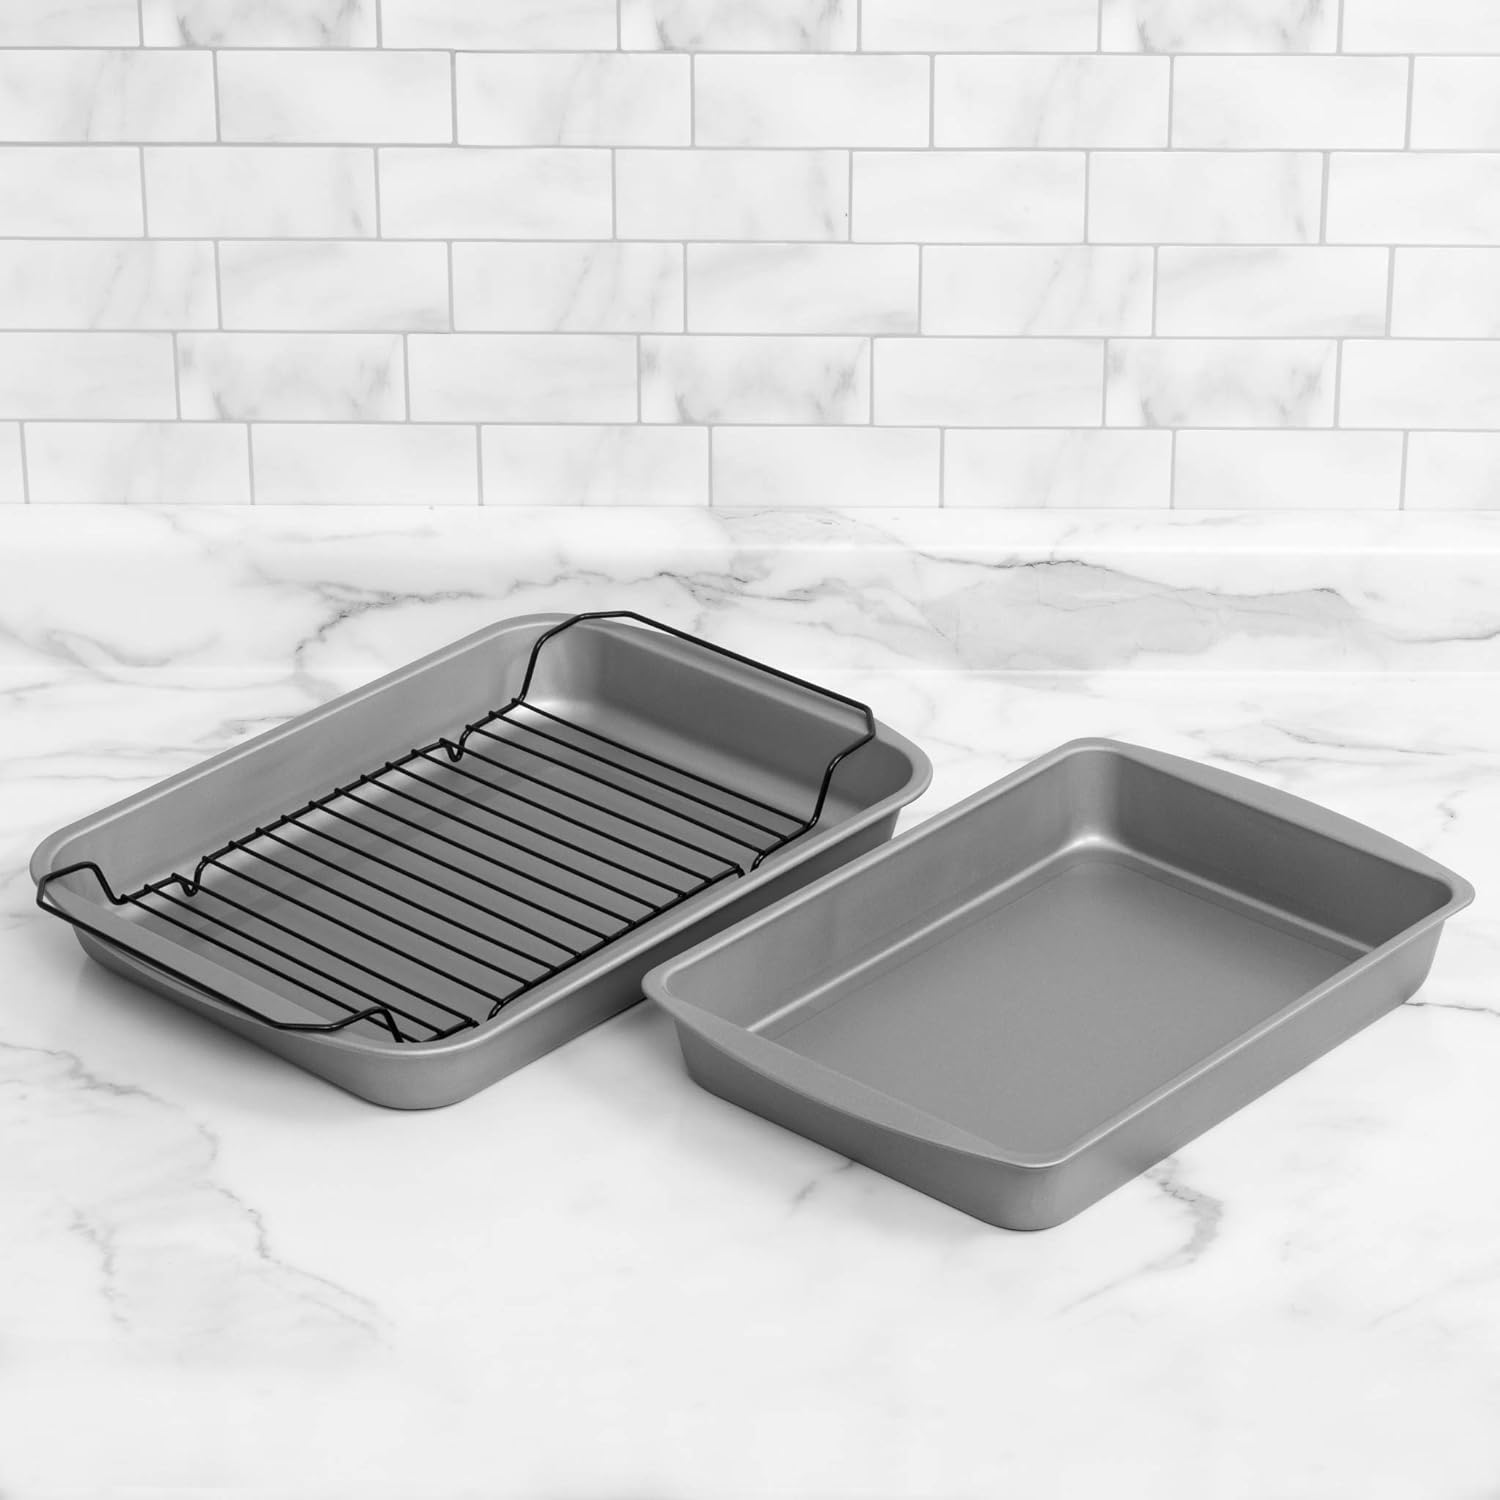 G & S Metal Products Company OvenStuff Non-Stick Baking, Roasting Pan Chrome Broiler Rack, 3-Piece Set